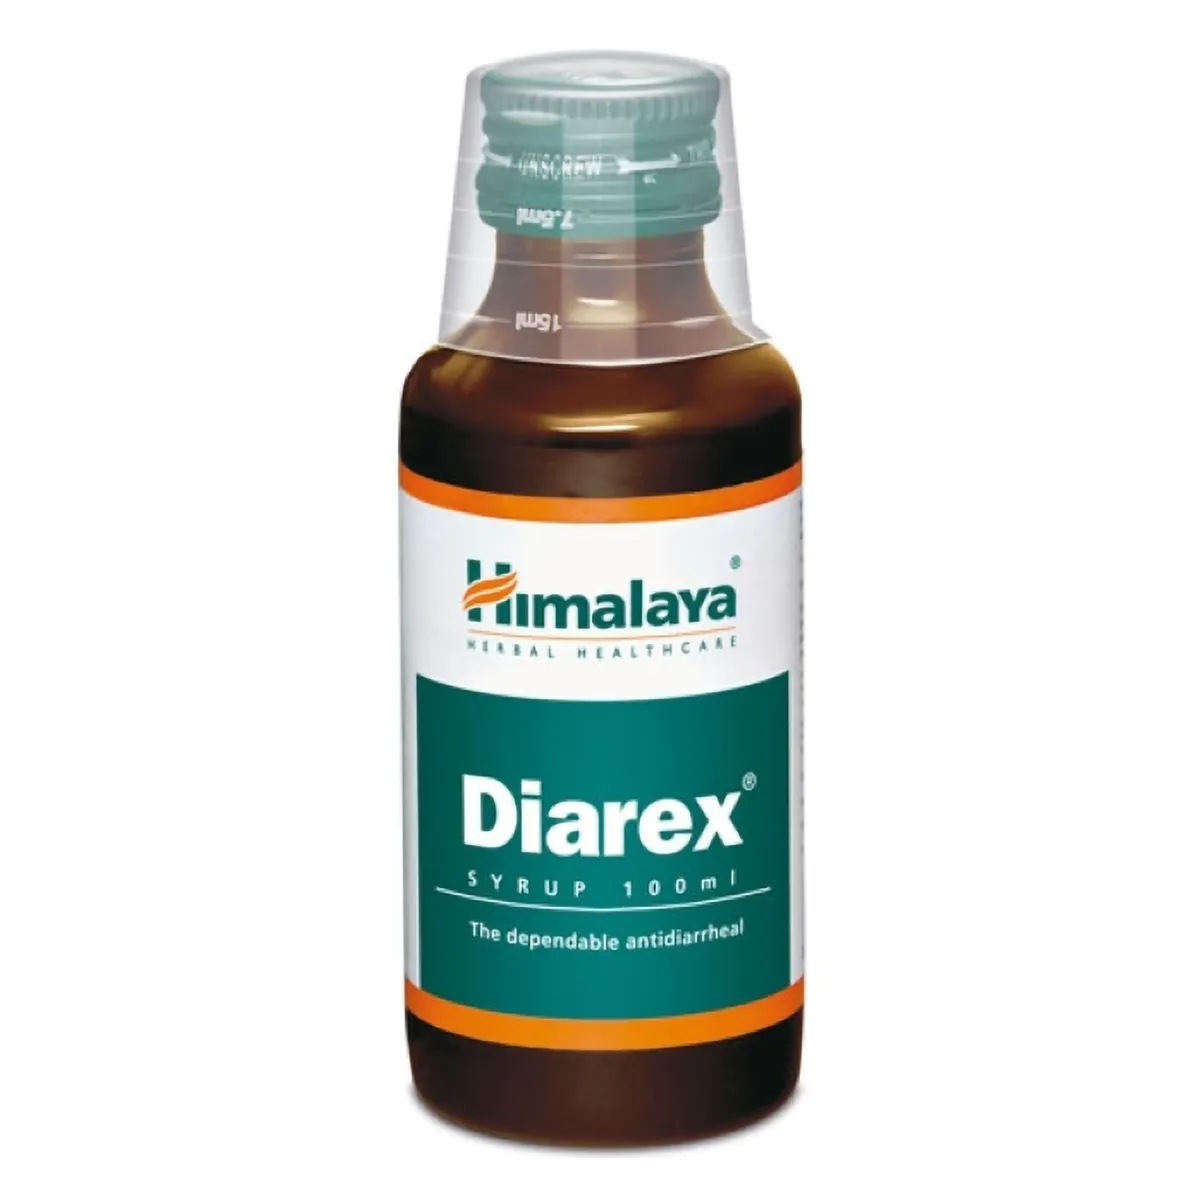 Himalaya Liv.52 DS Syrup, 100 ml Price, Uses, Side Effects